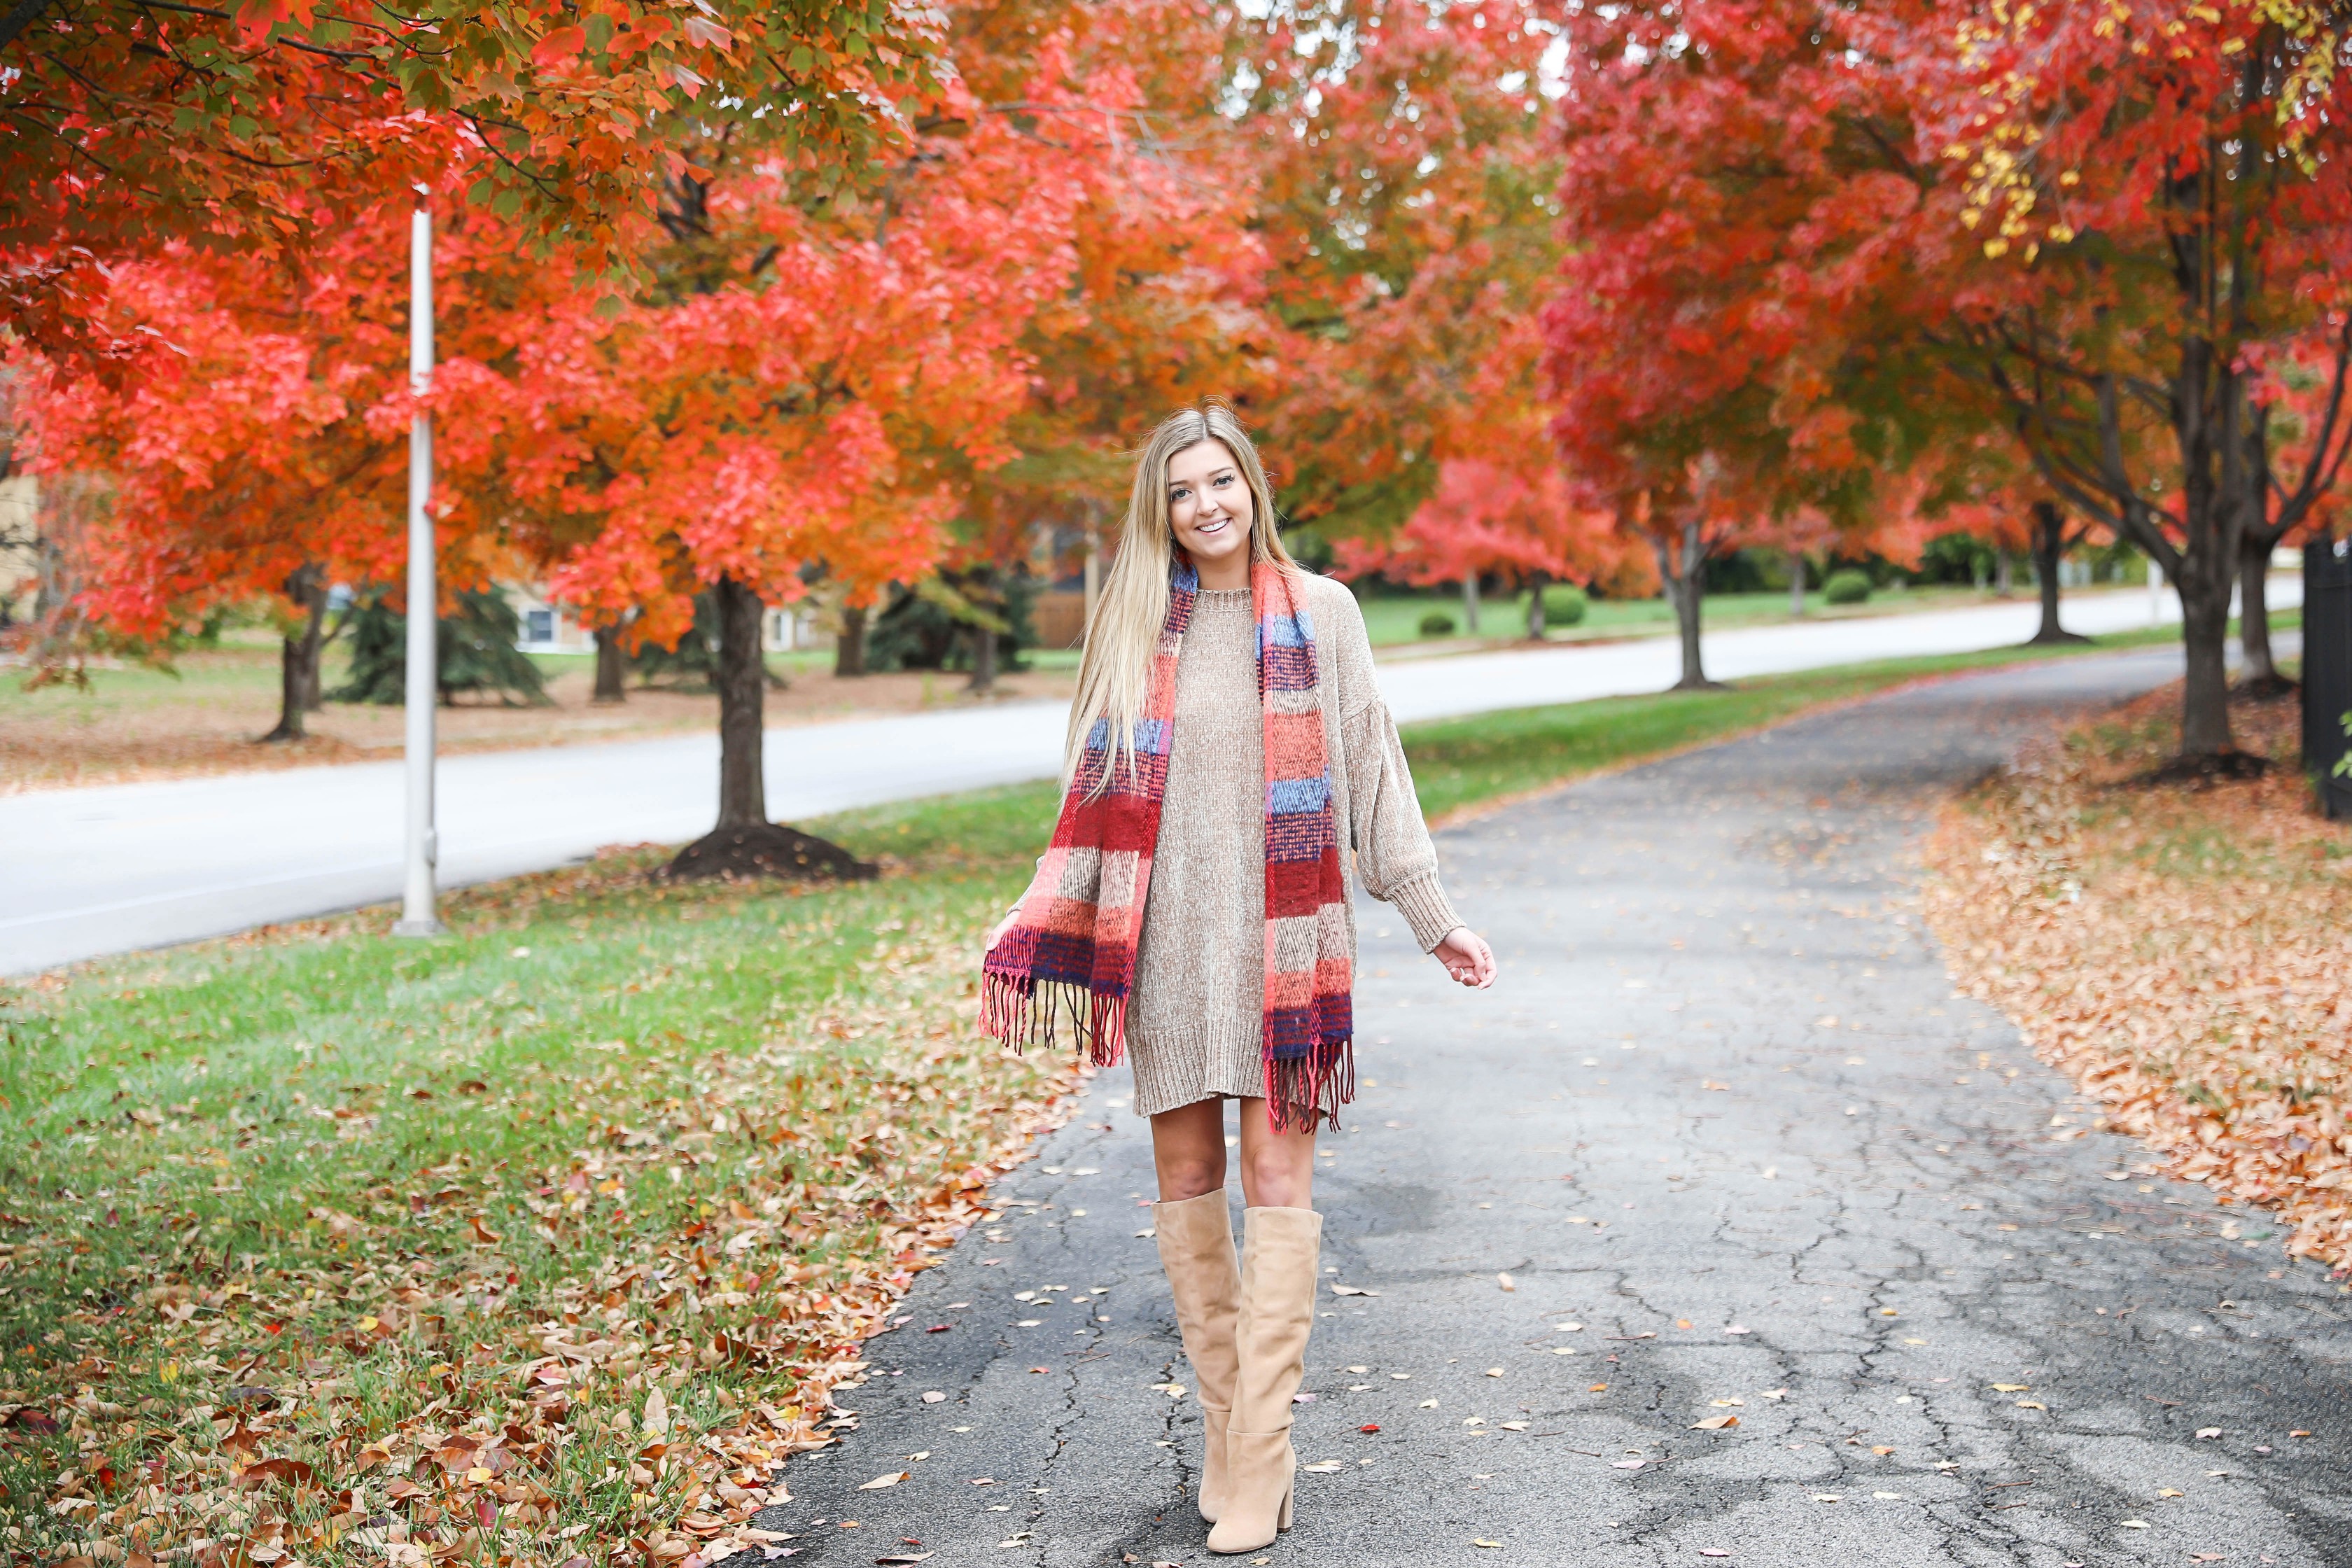 A Fall Outfit that Matches the Autumn Leaves